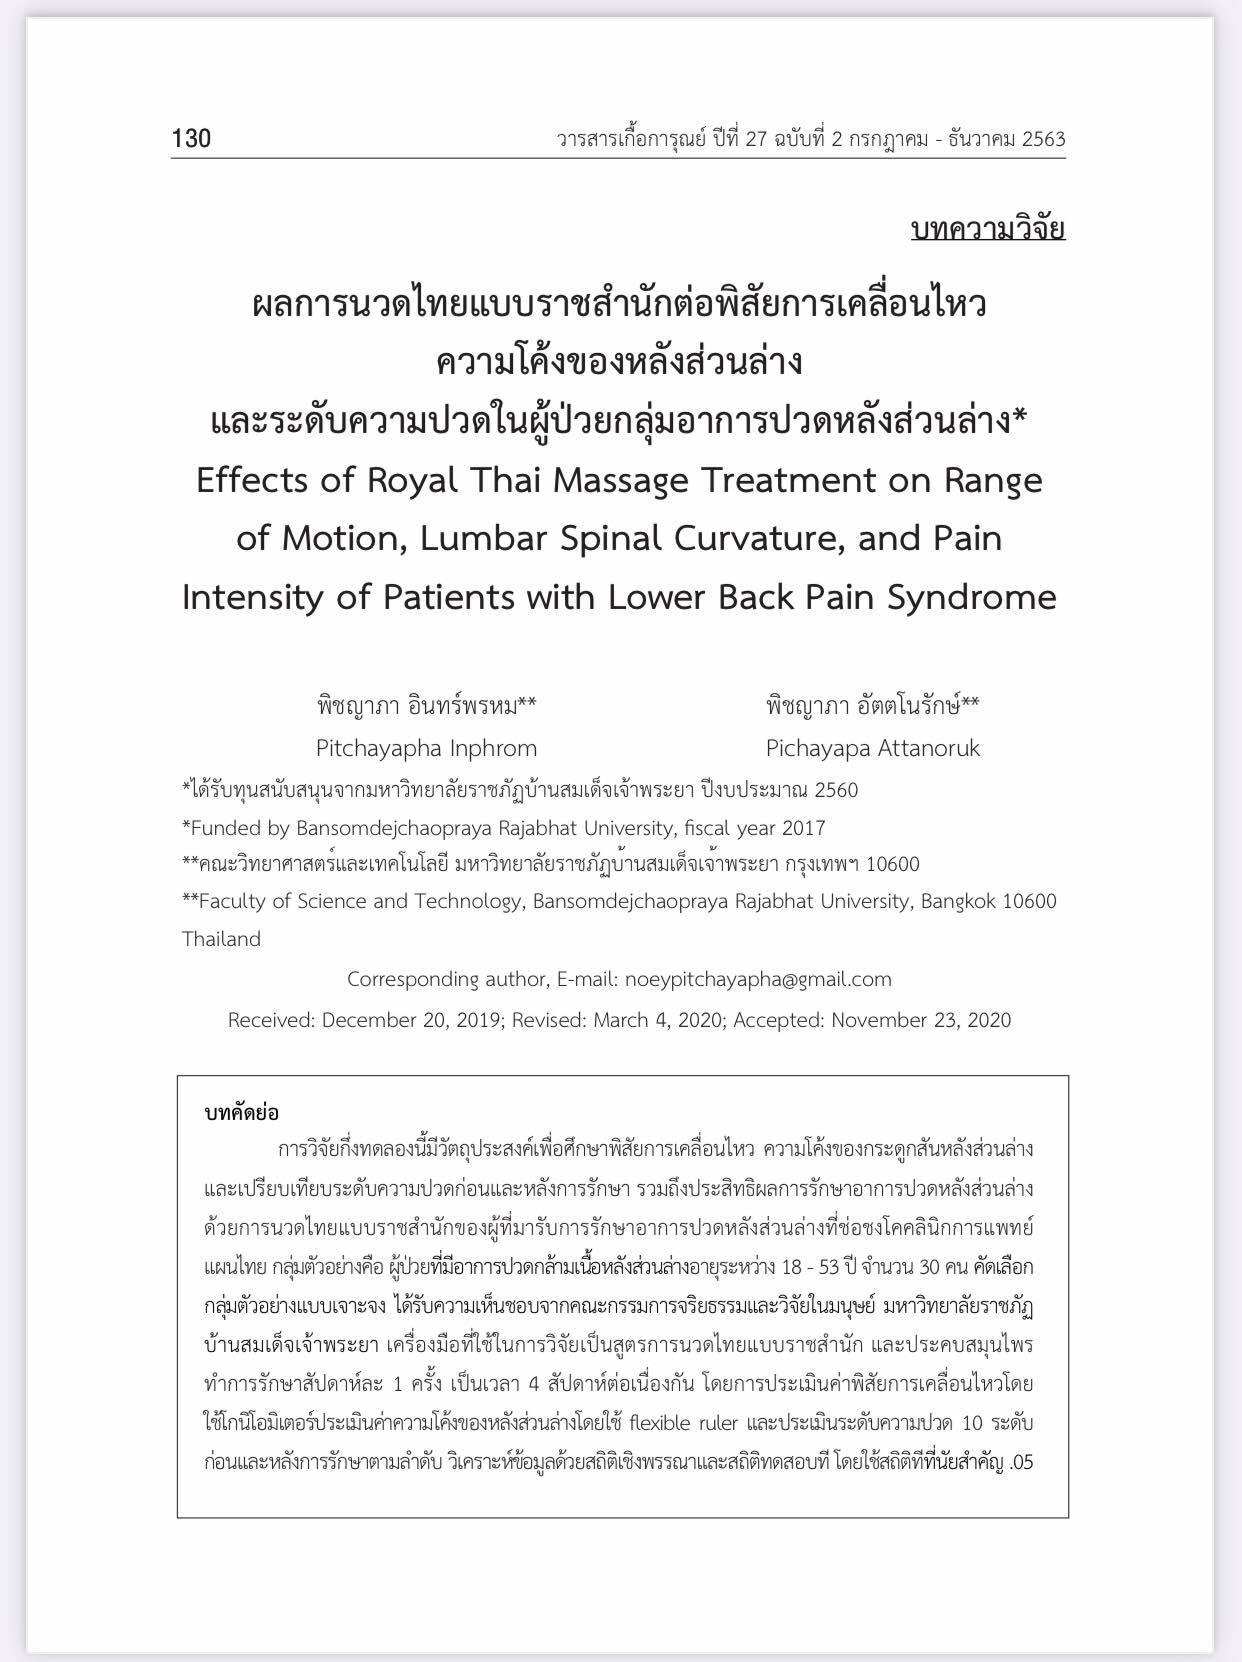 Effects of Royal Thai Massage Treatment on Range of Motion, Lumbar Spinal Curvature, and Pain Intensity of Patients with Lower Back Pain Syndrome